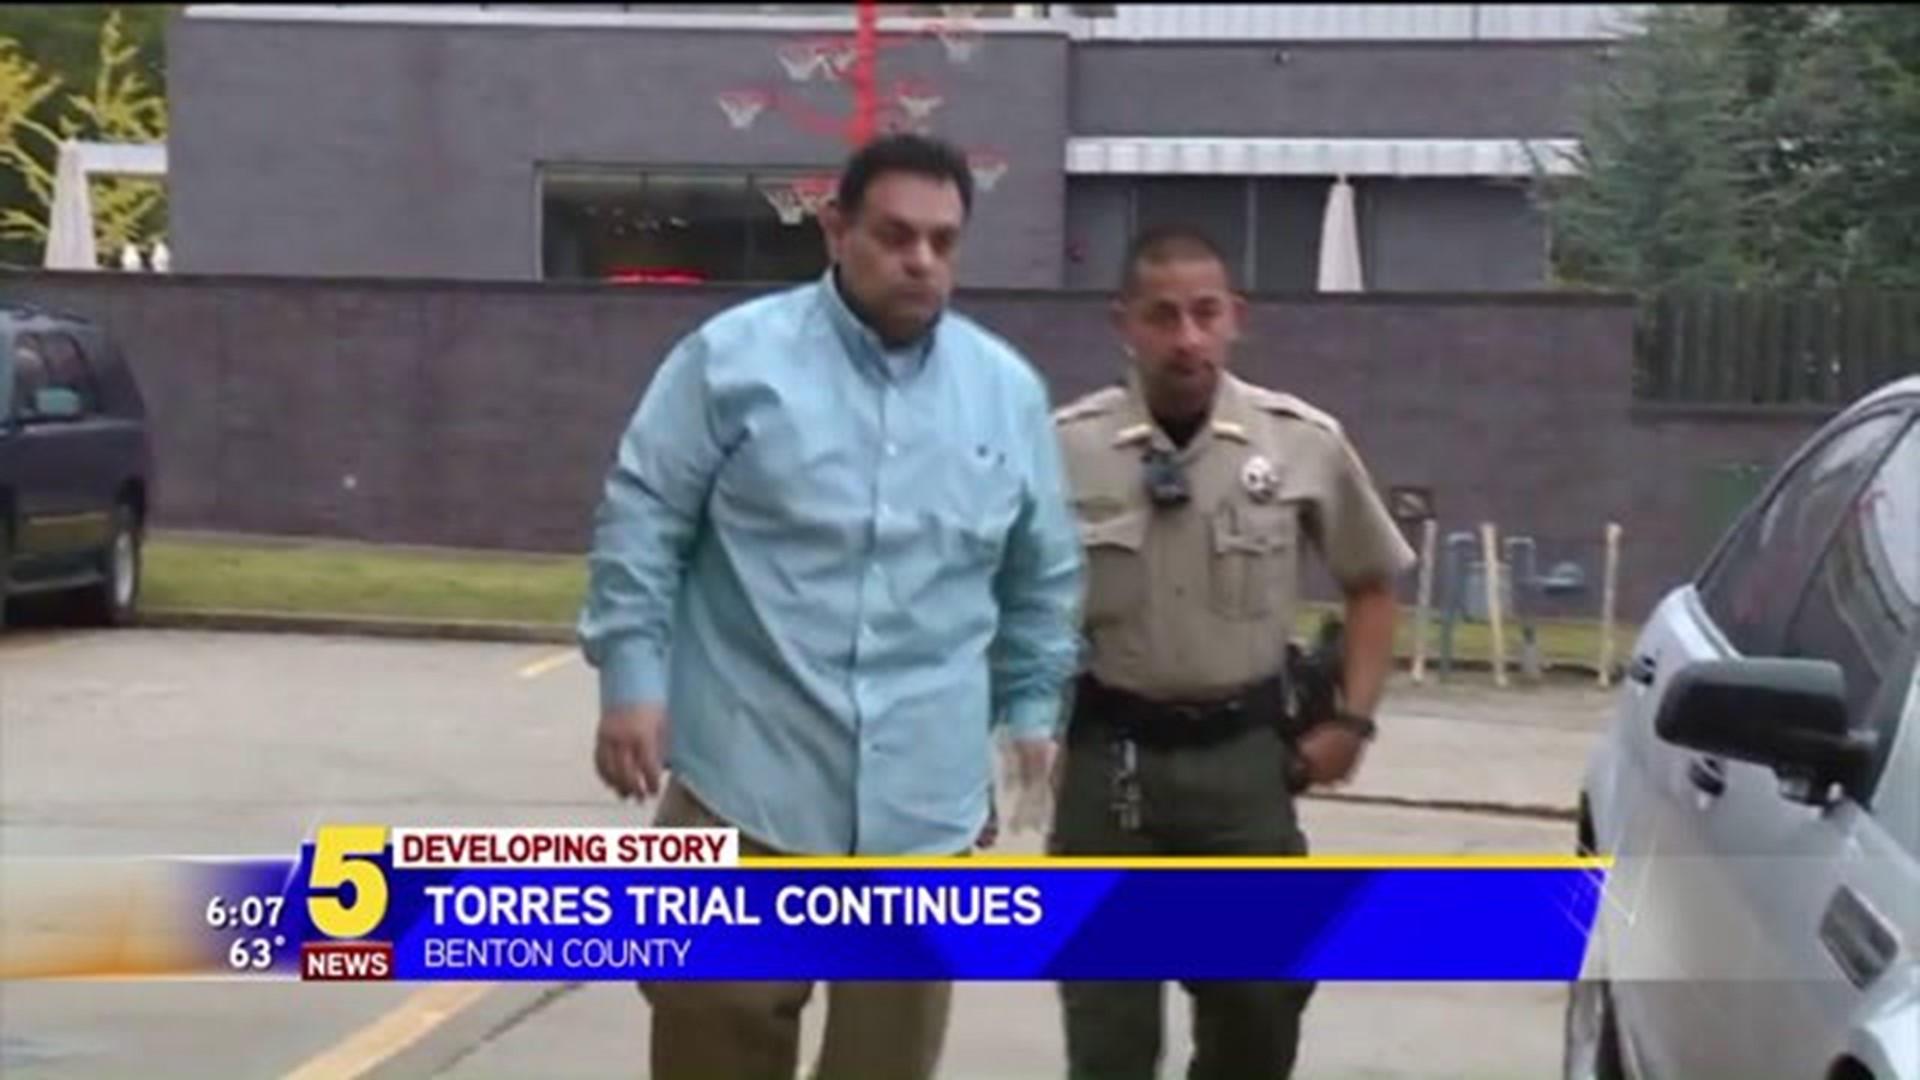 Torres Trial Continues